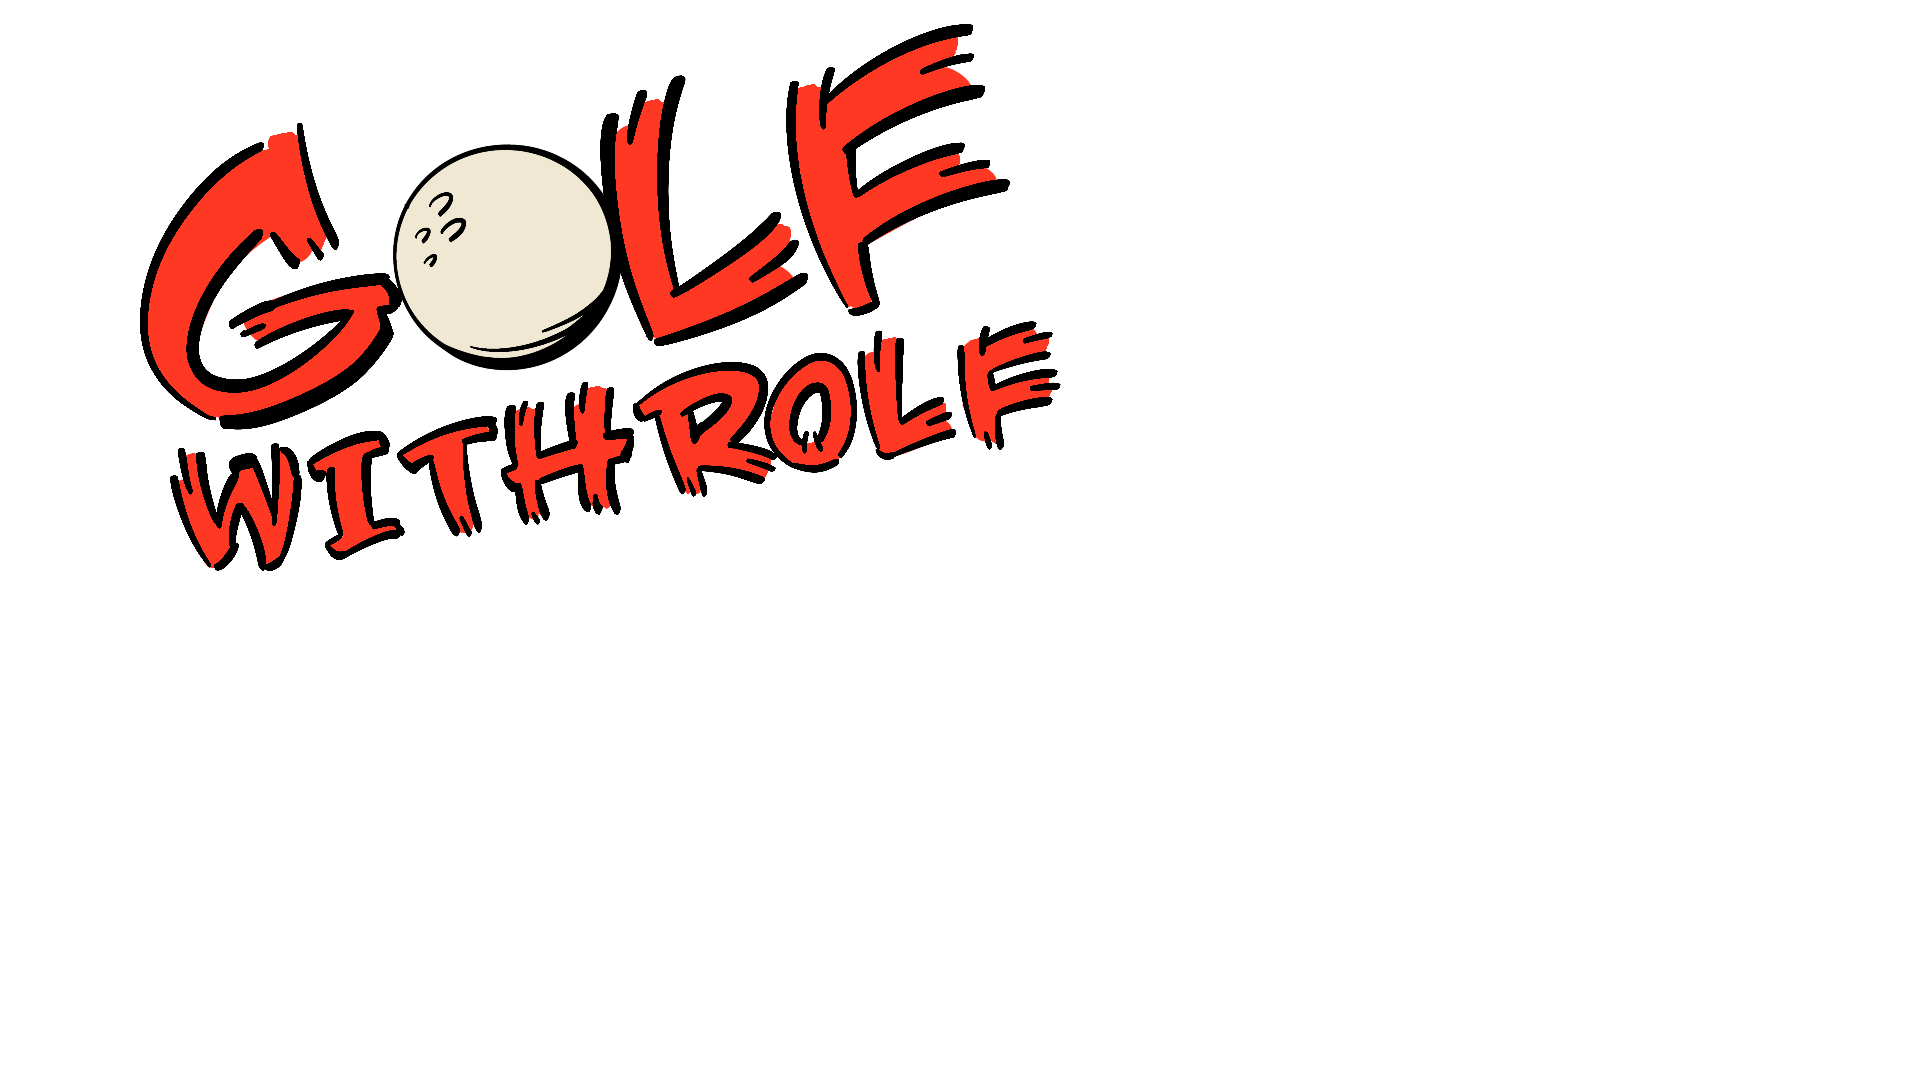 Golf with Rolf